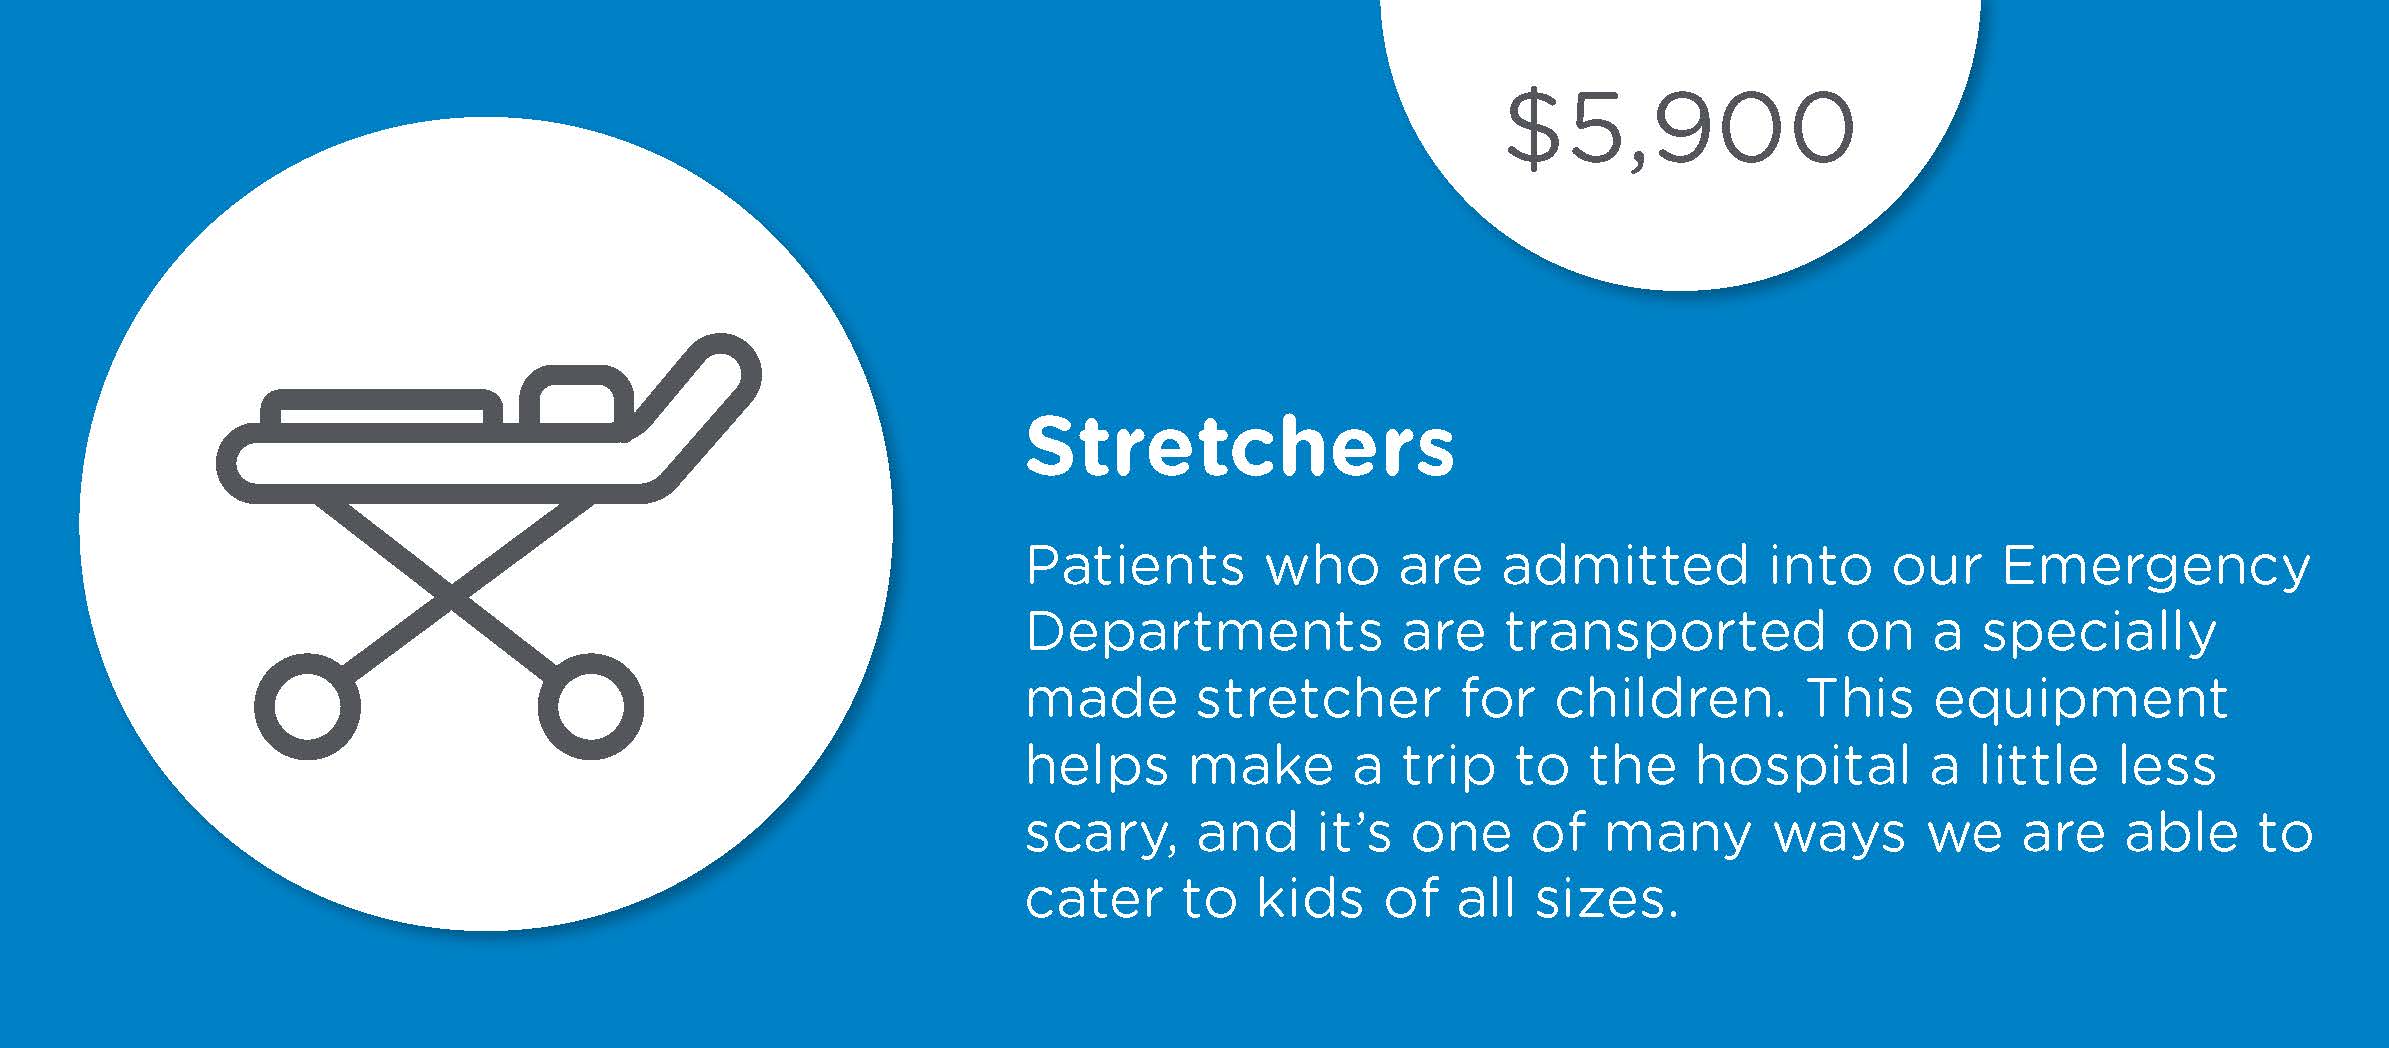 cost of stretchers 